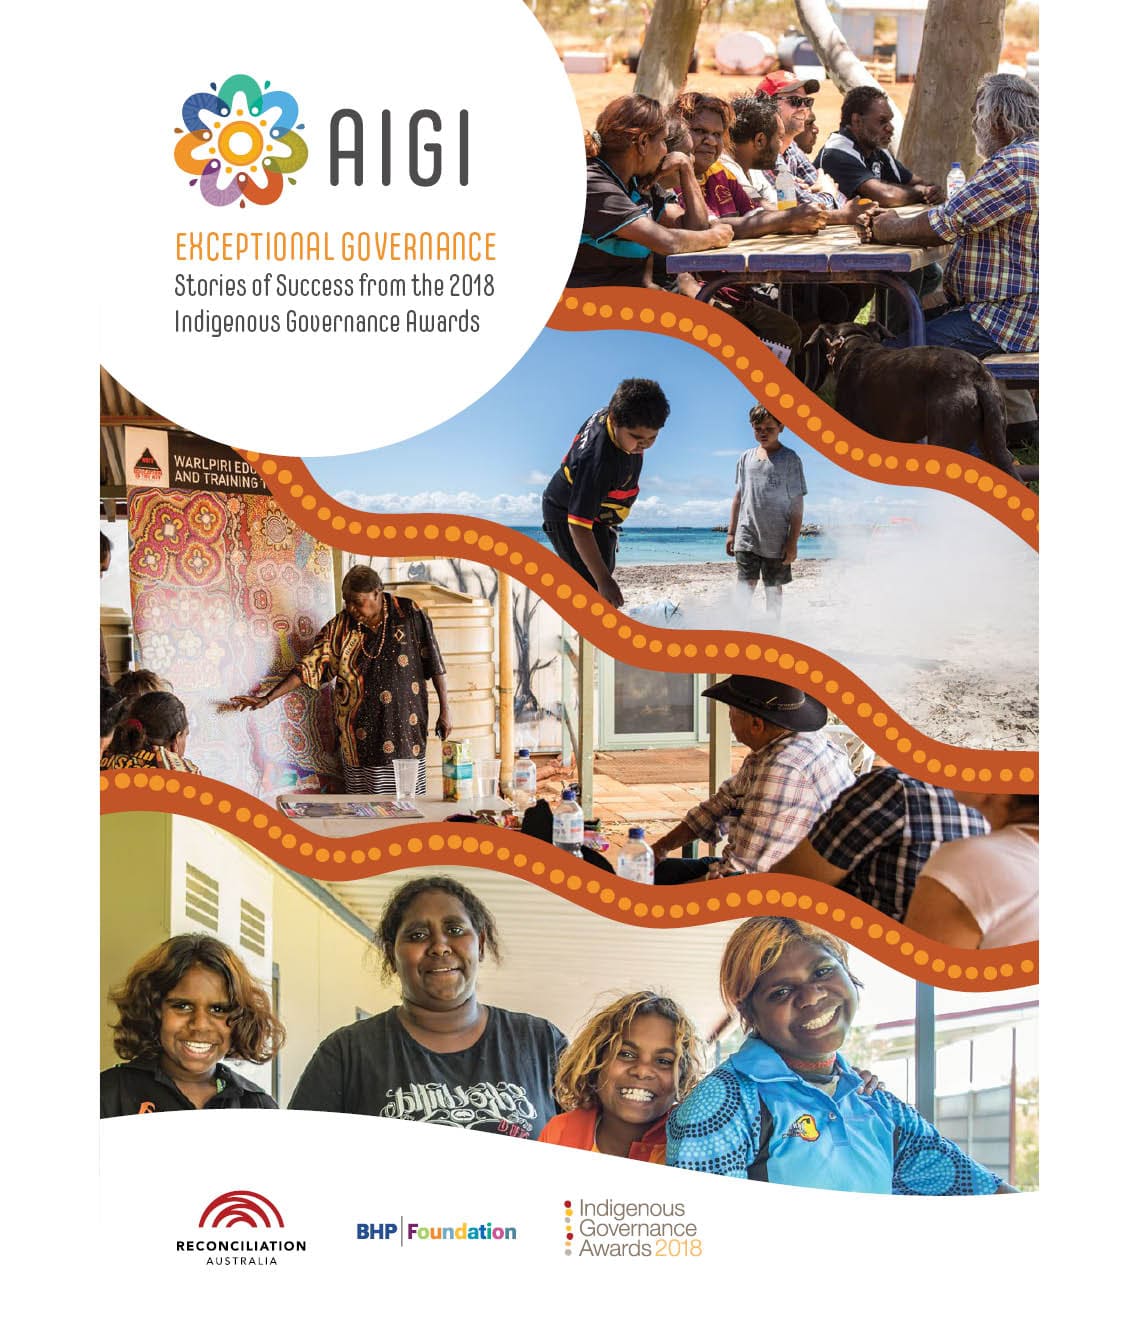 Exceptional Governance: Stories of Success from the 2018 Indigenous Governance Awards